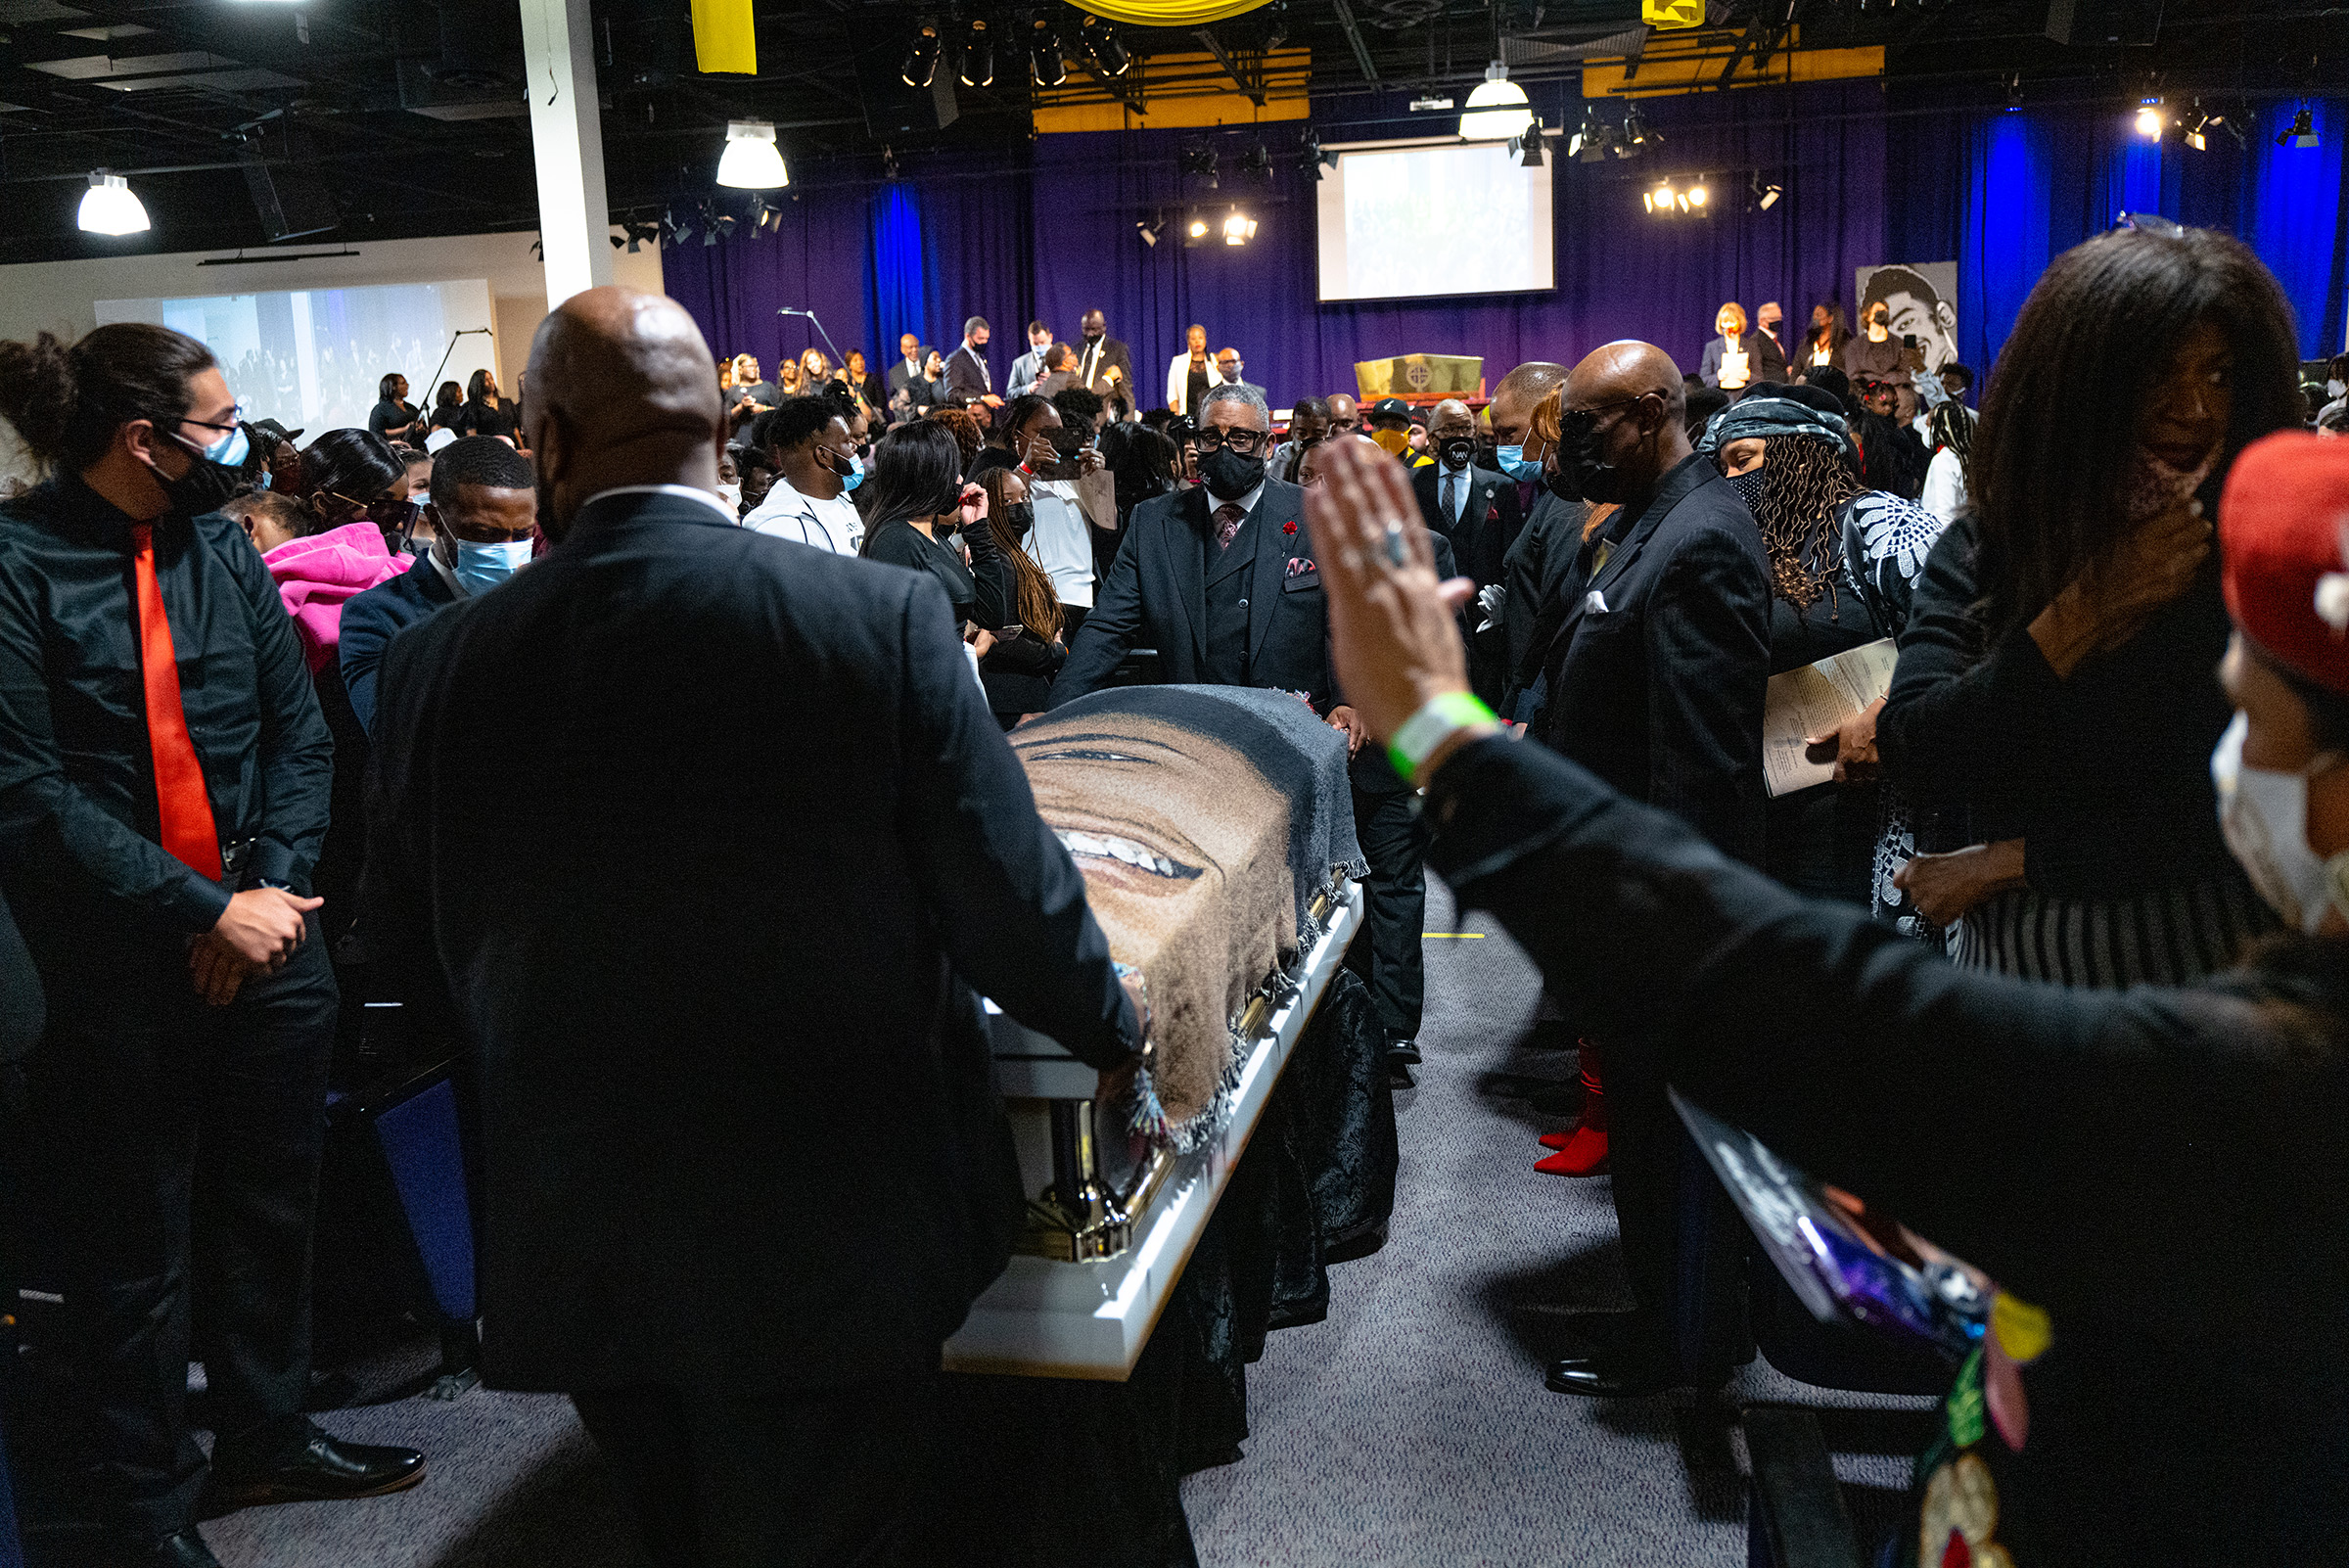 The casket of Daunte Wright was taken from the church after his funeral as his family walked behind it at Shiloh Temple International Ministries in Minneapolis on April 22.